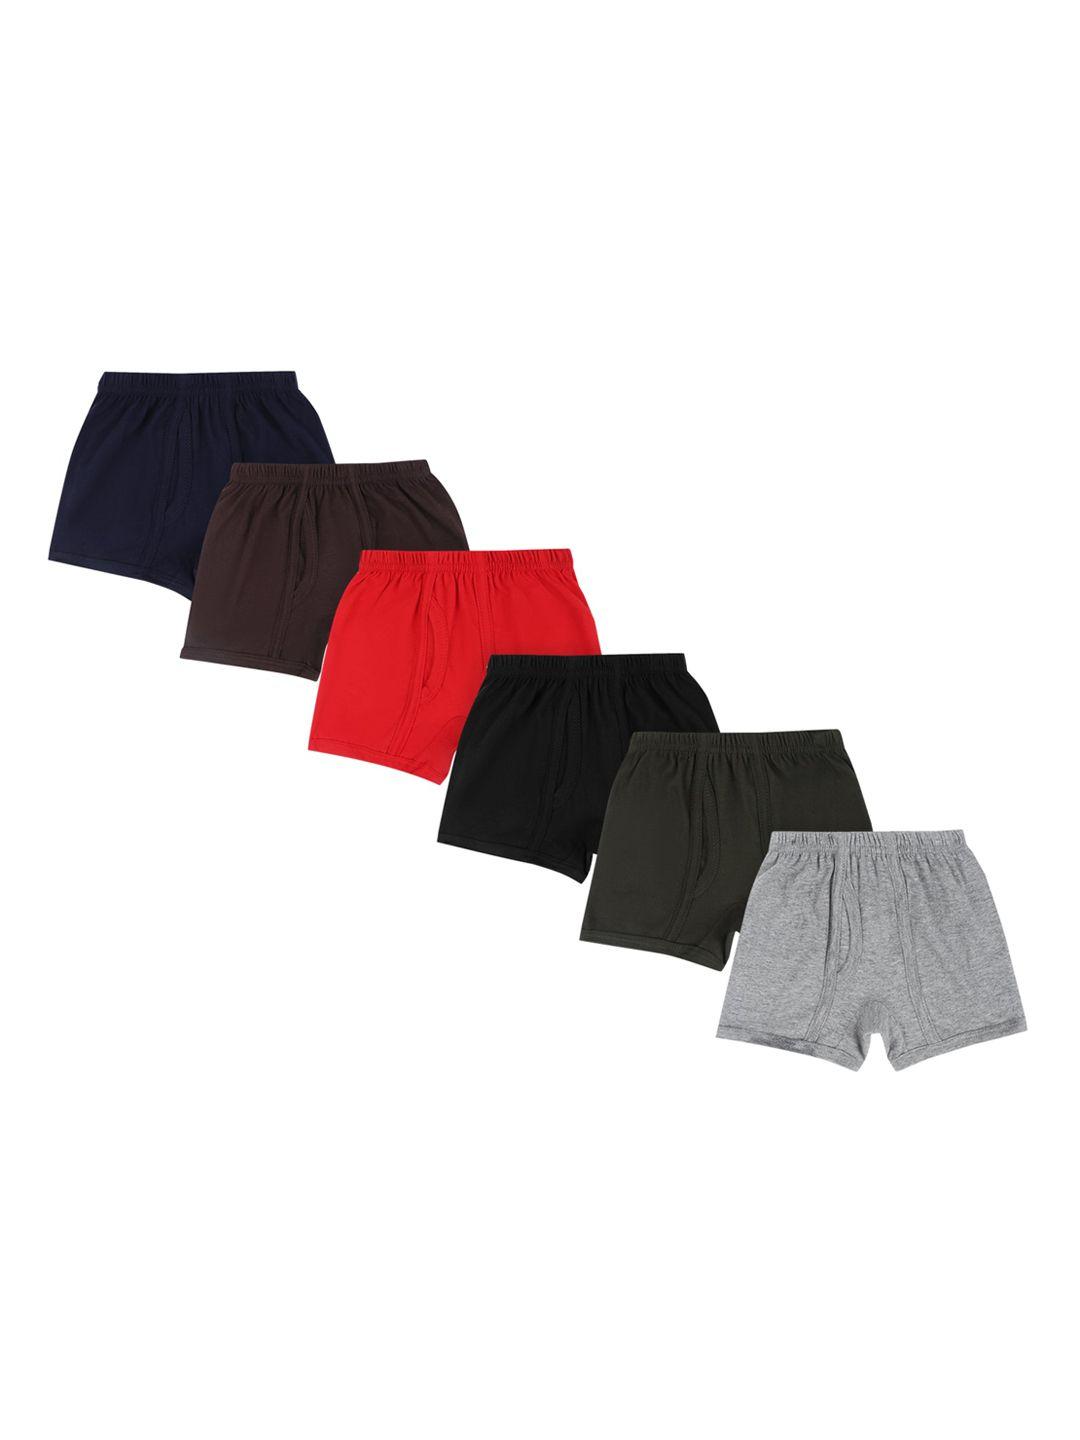 dyca boys pack of 6 assorted solid trunks dia504-pk001_p6